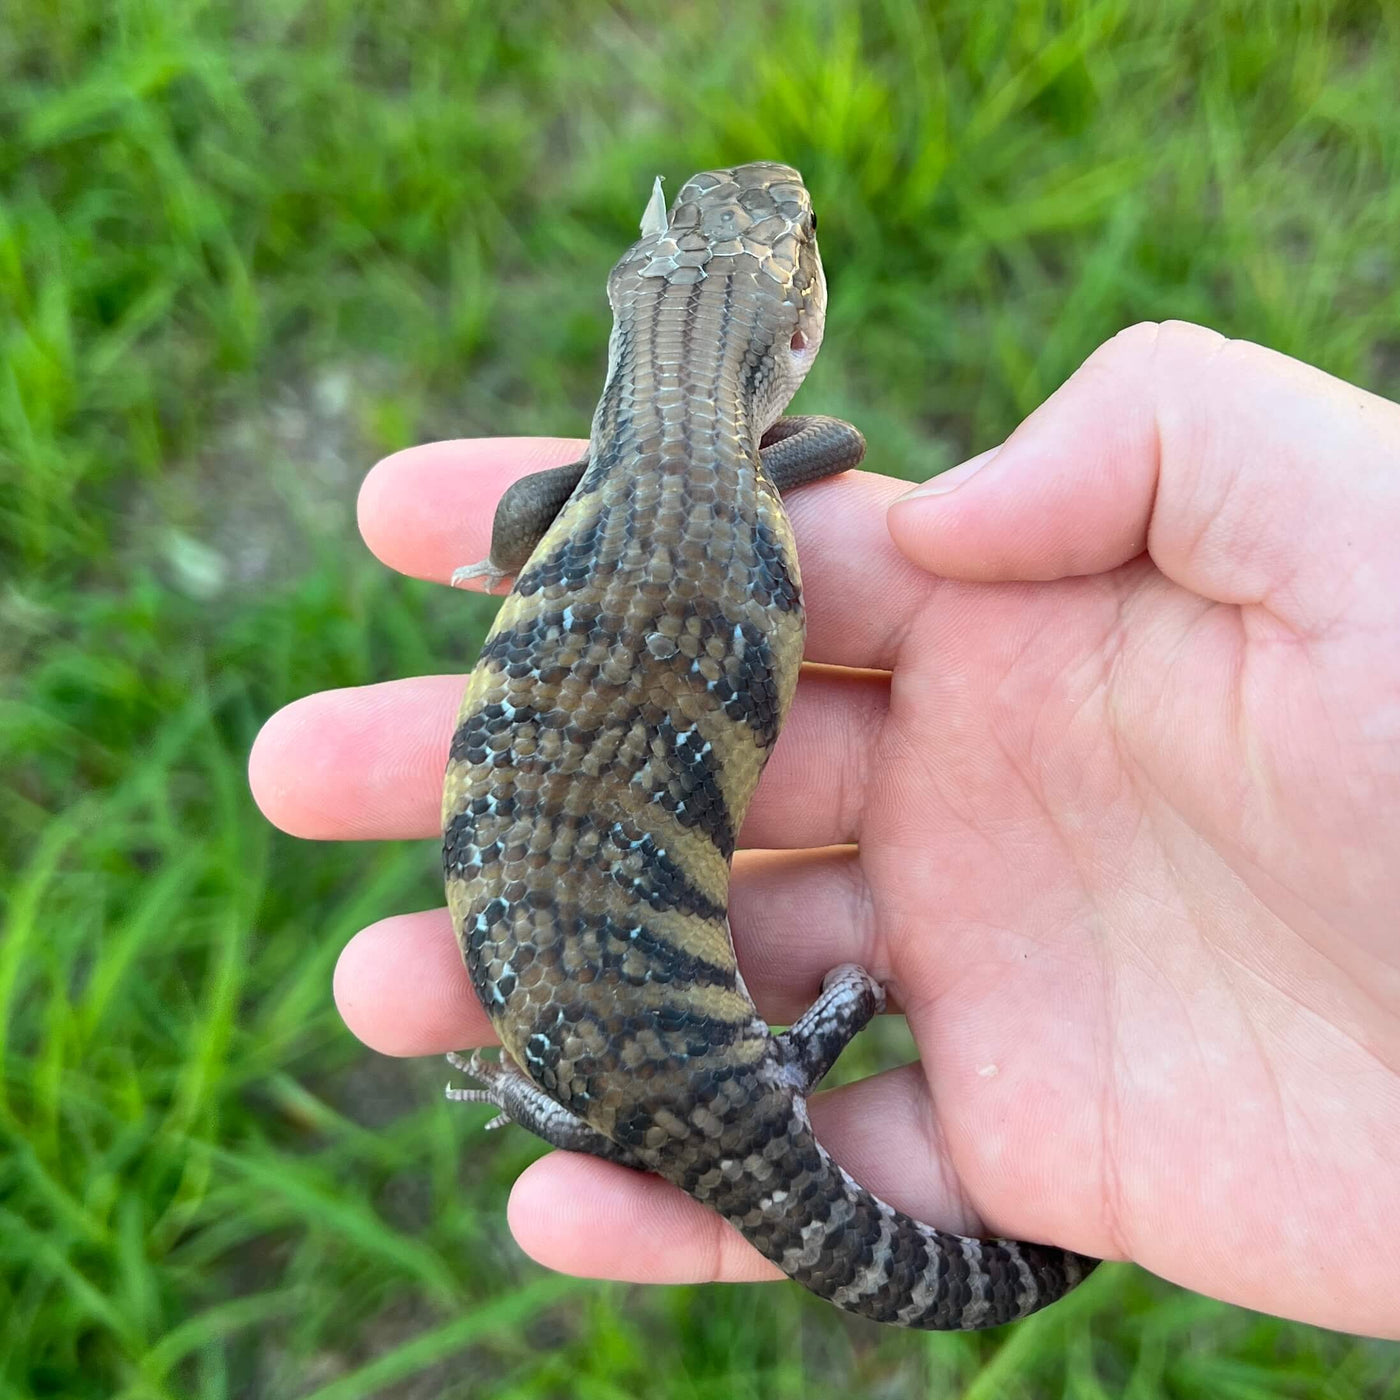 northern blue tongue skink for sale online at cheap prices, buy reptiles near me